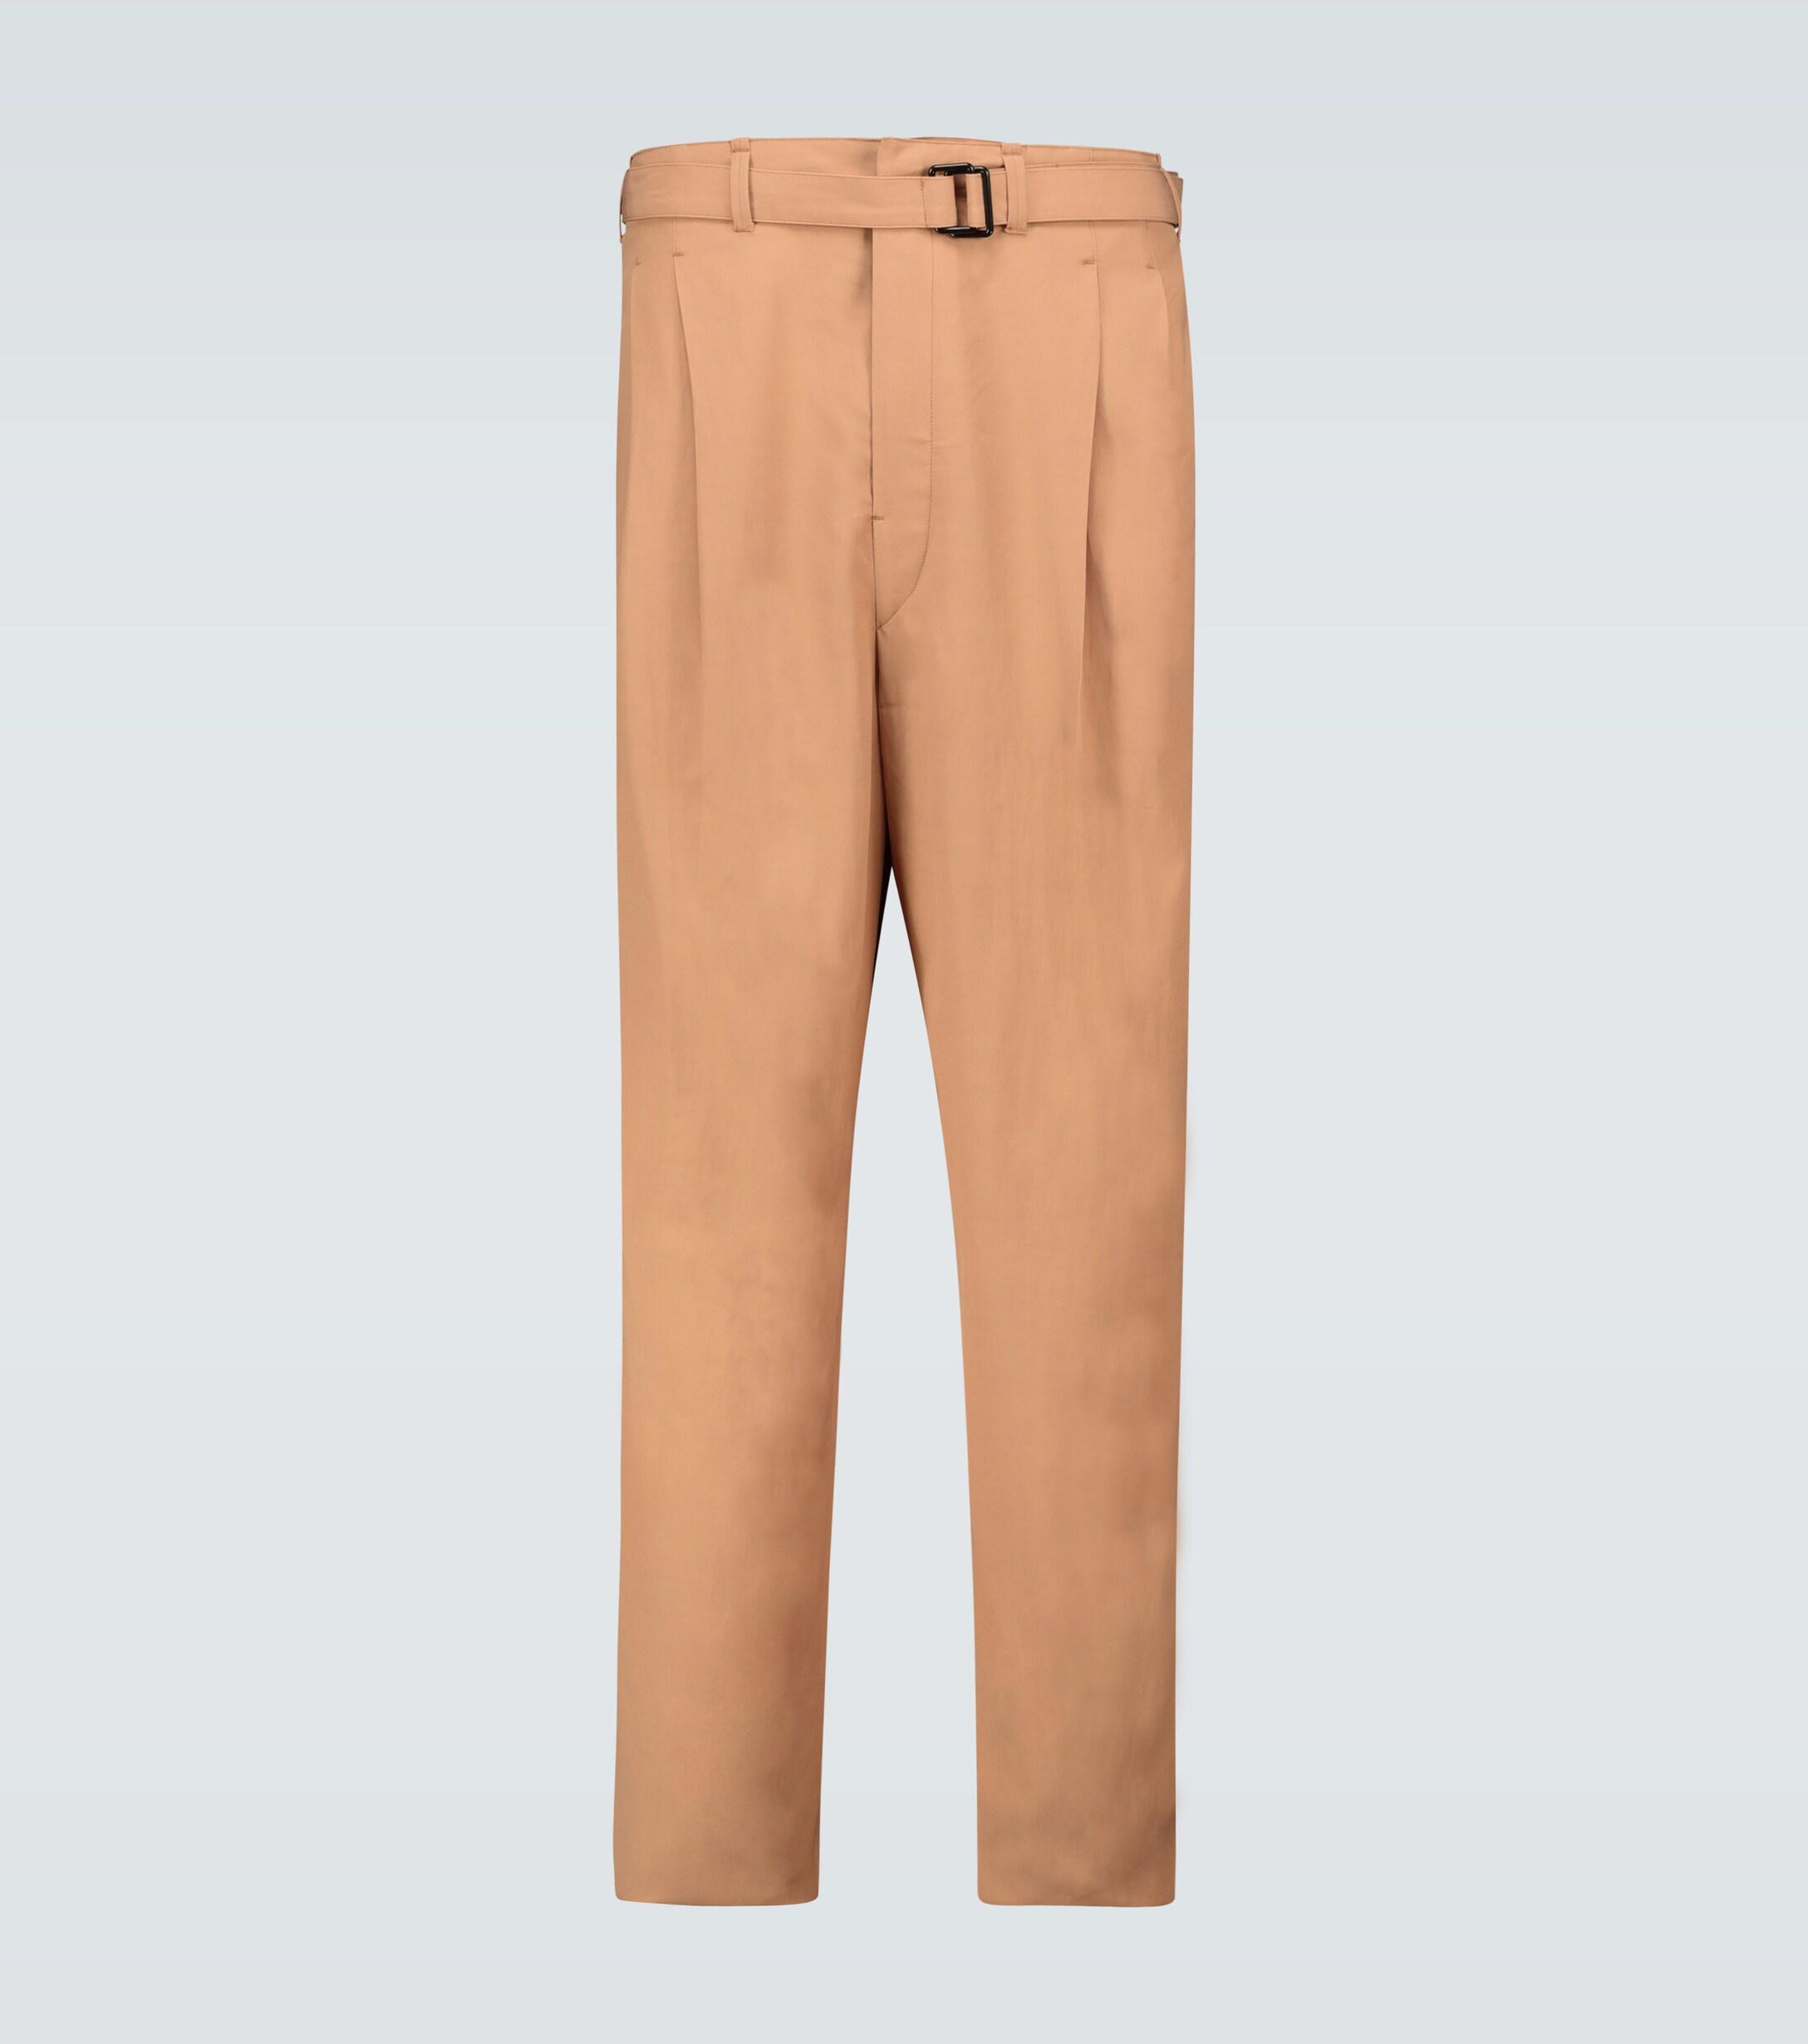 Lemaire Cotton Pleated Pants With Belt in Beige (Natural) for Men - Lyst